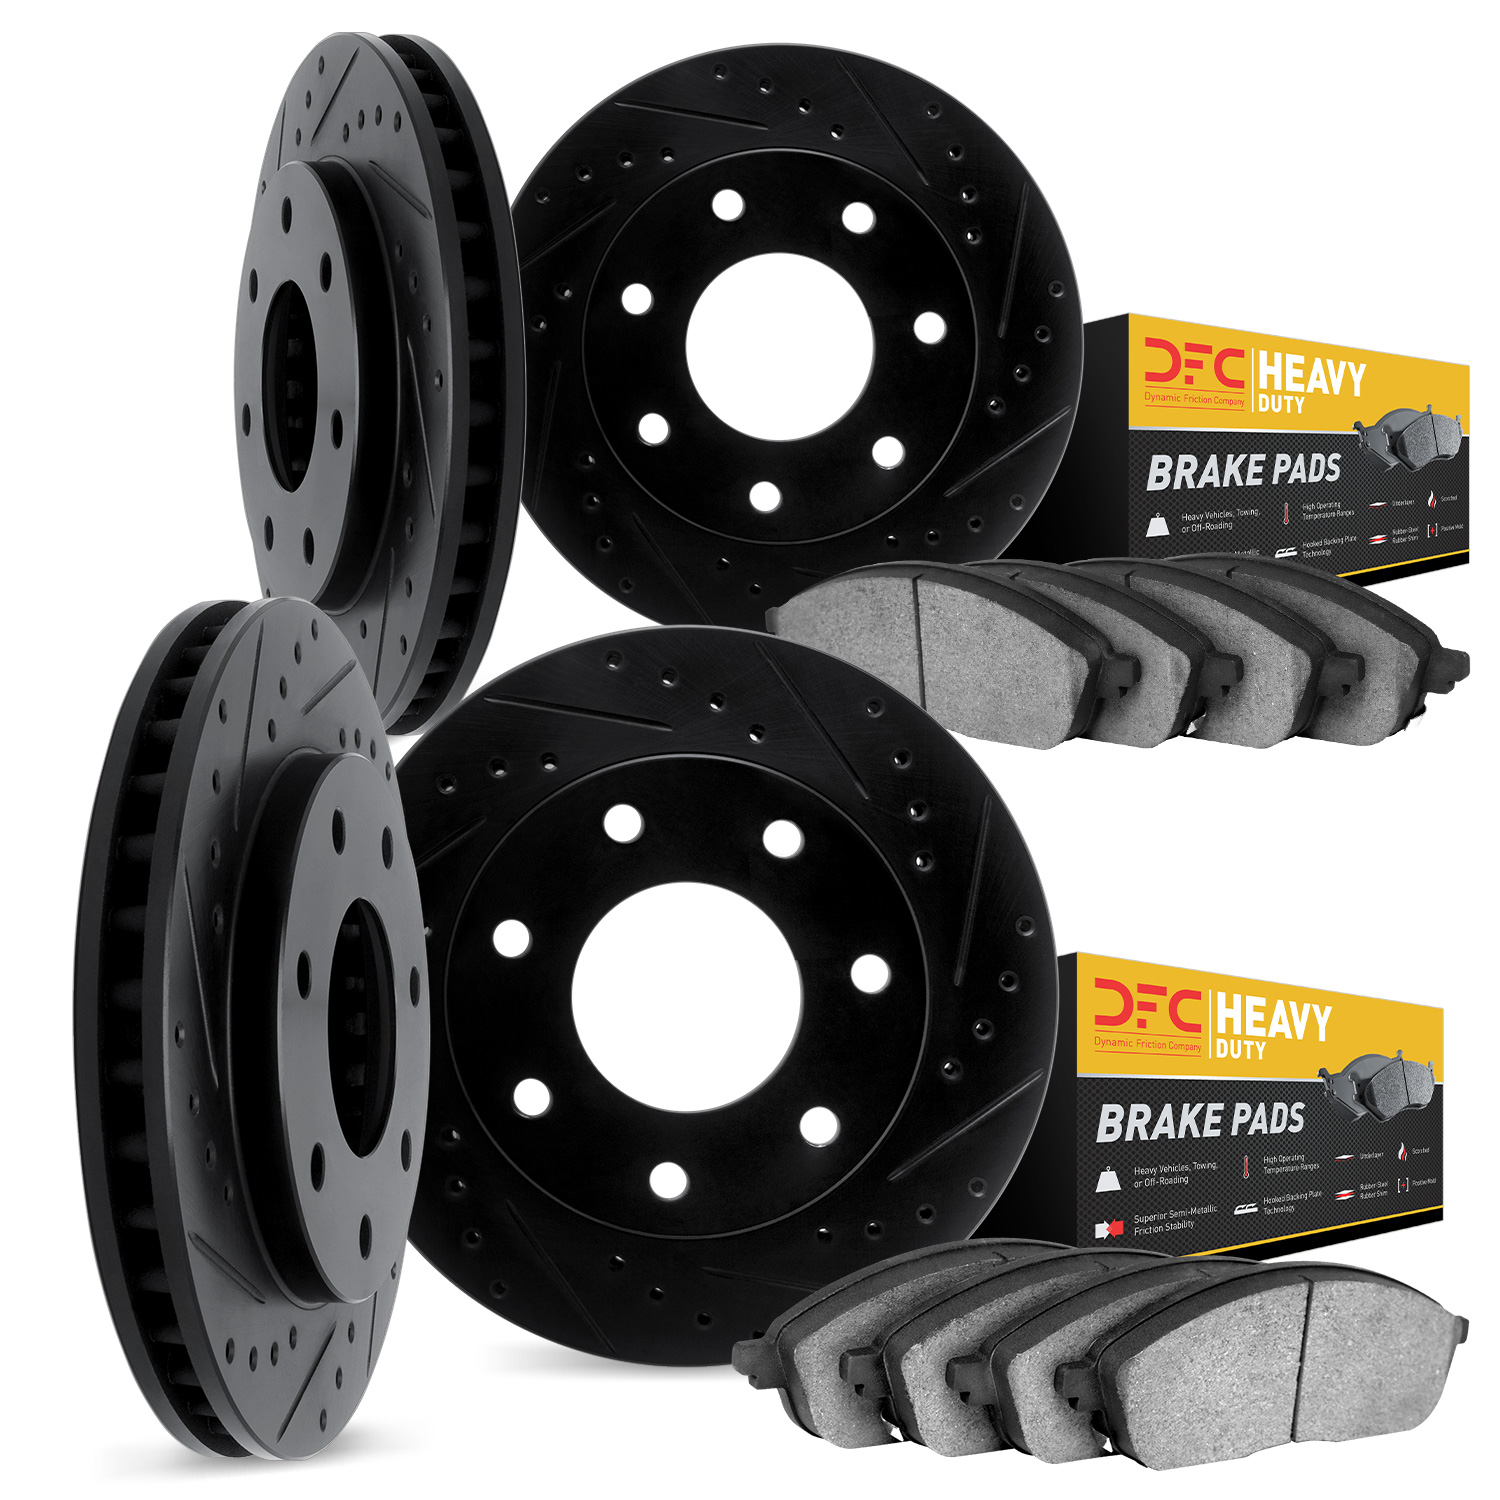 8204-99078 Drilled/Slotted Rotors w/Heavy-Duty Brake Pads Kit [Silver], 2004-2008 Ford/Lincoln/Mercury/Mazda, Position: Front an